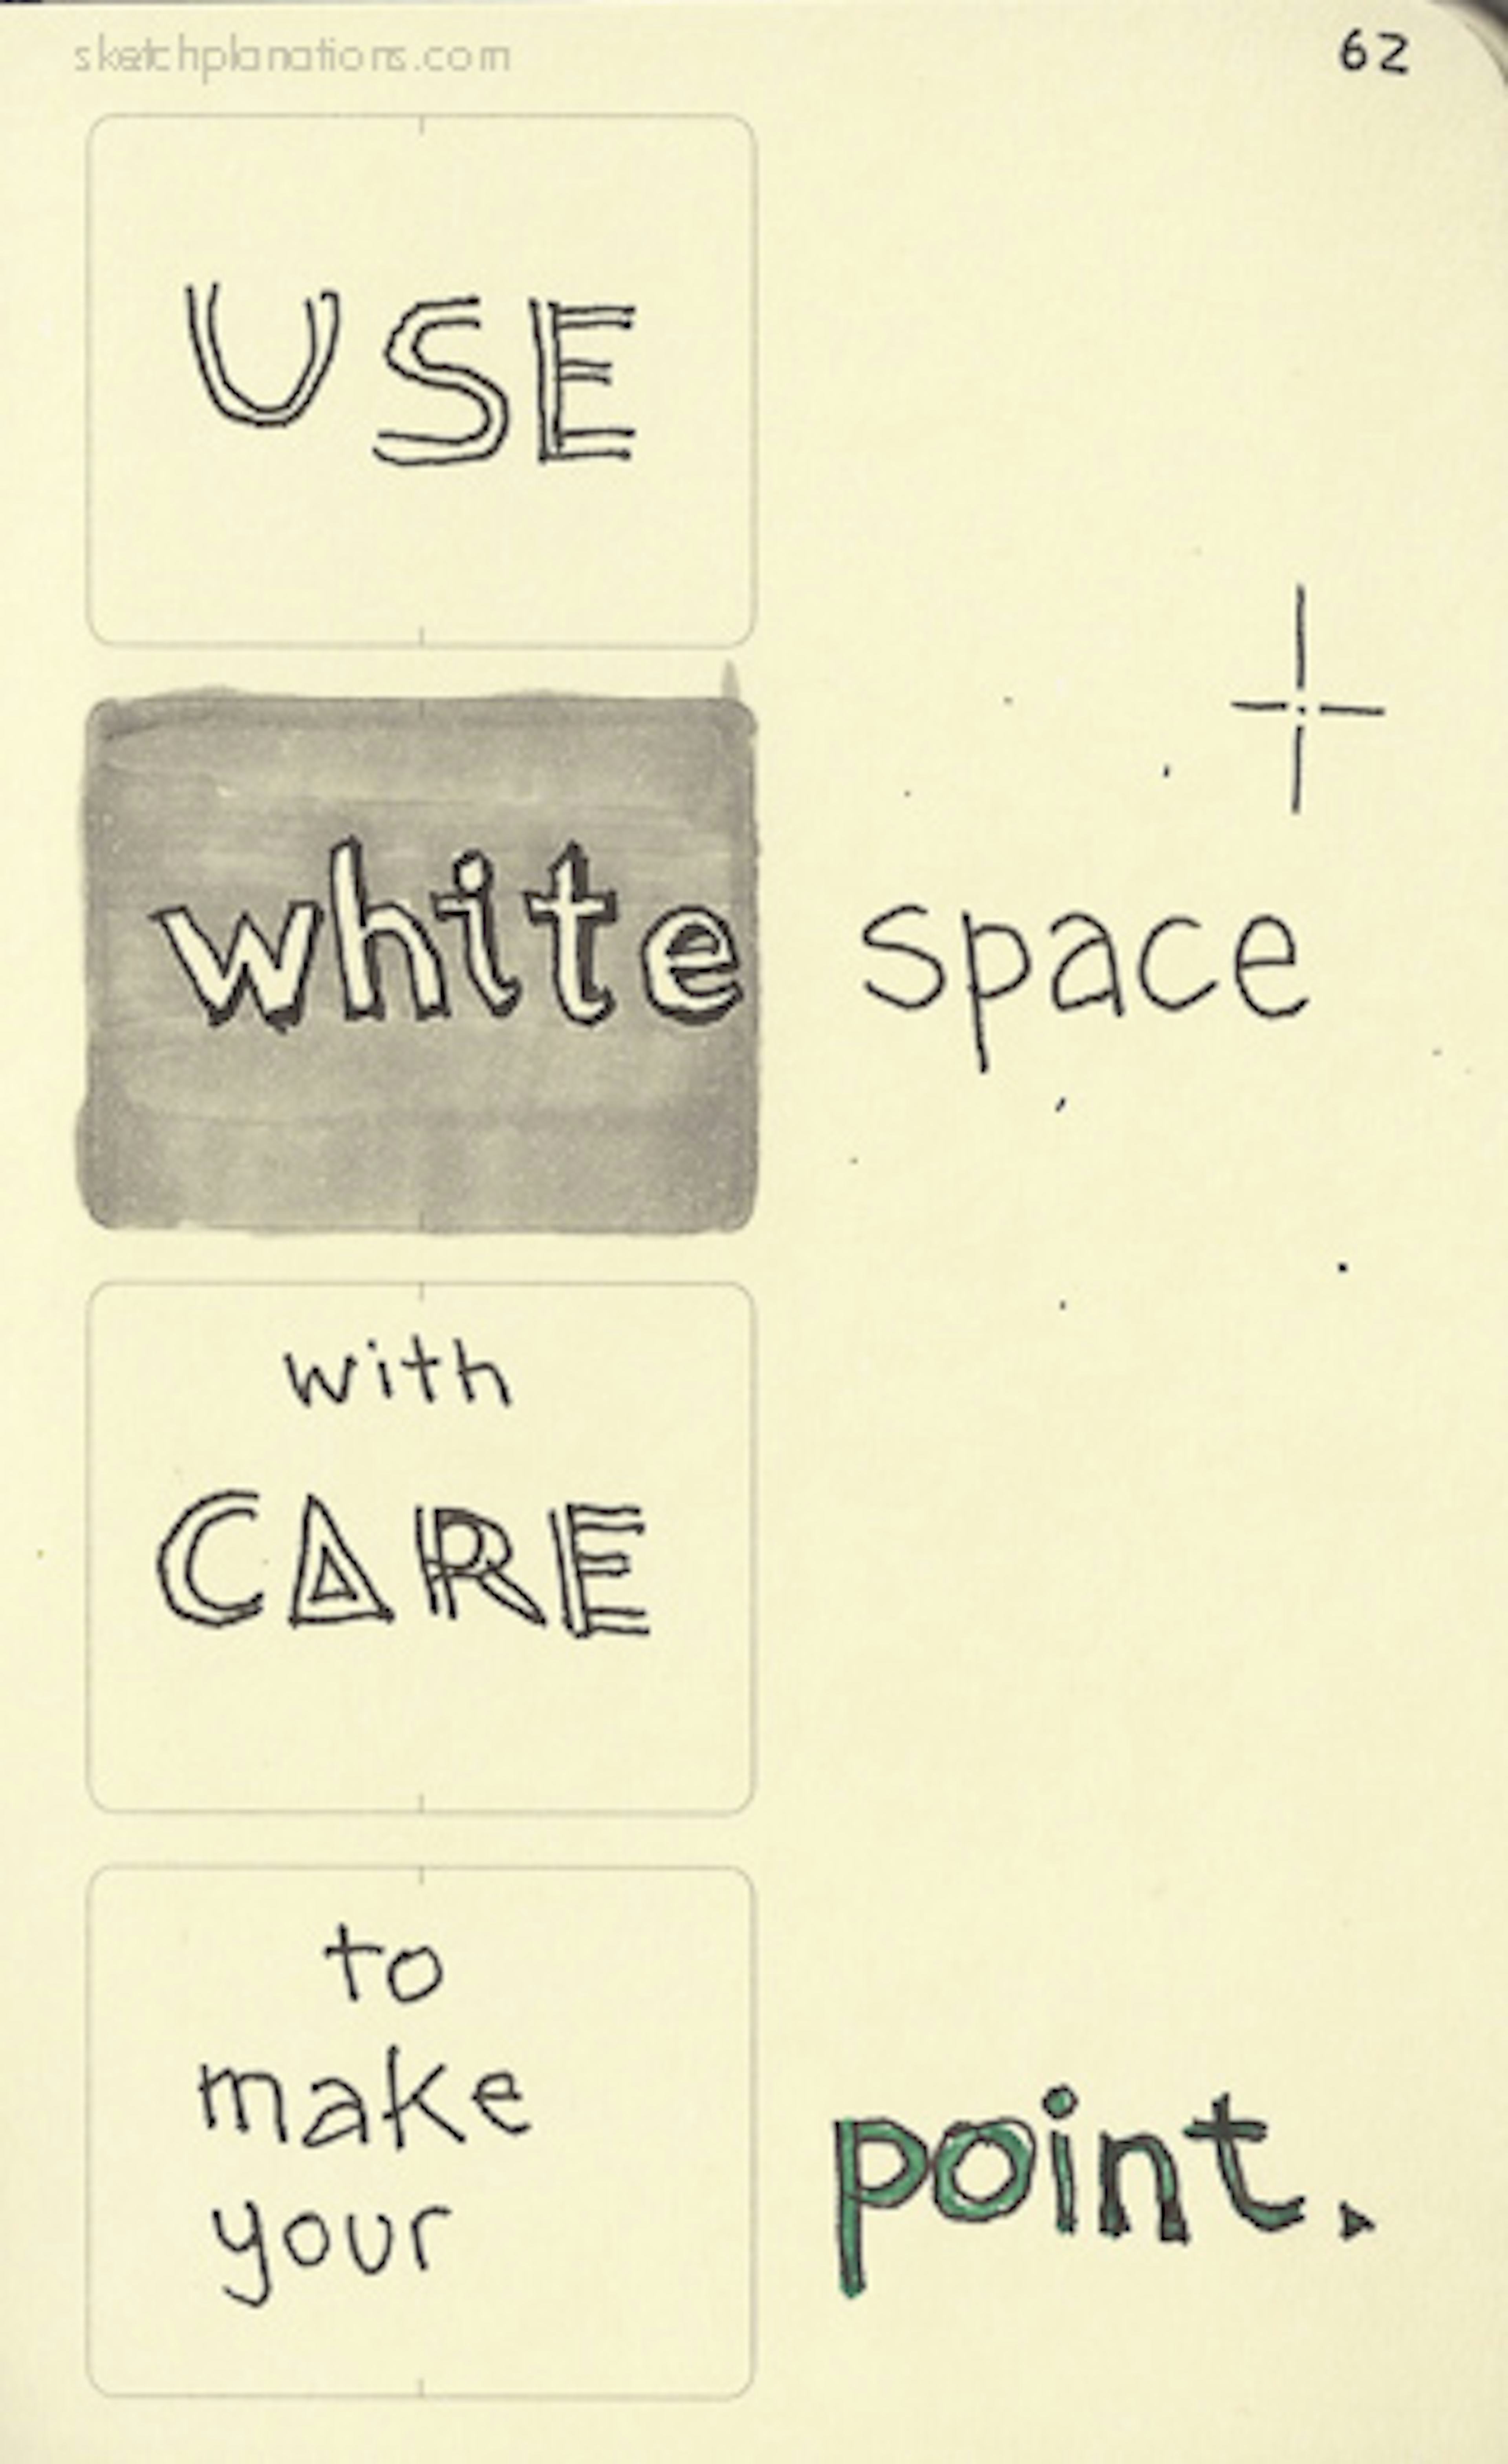 Use white space with care to make your point - Sketchplanations